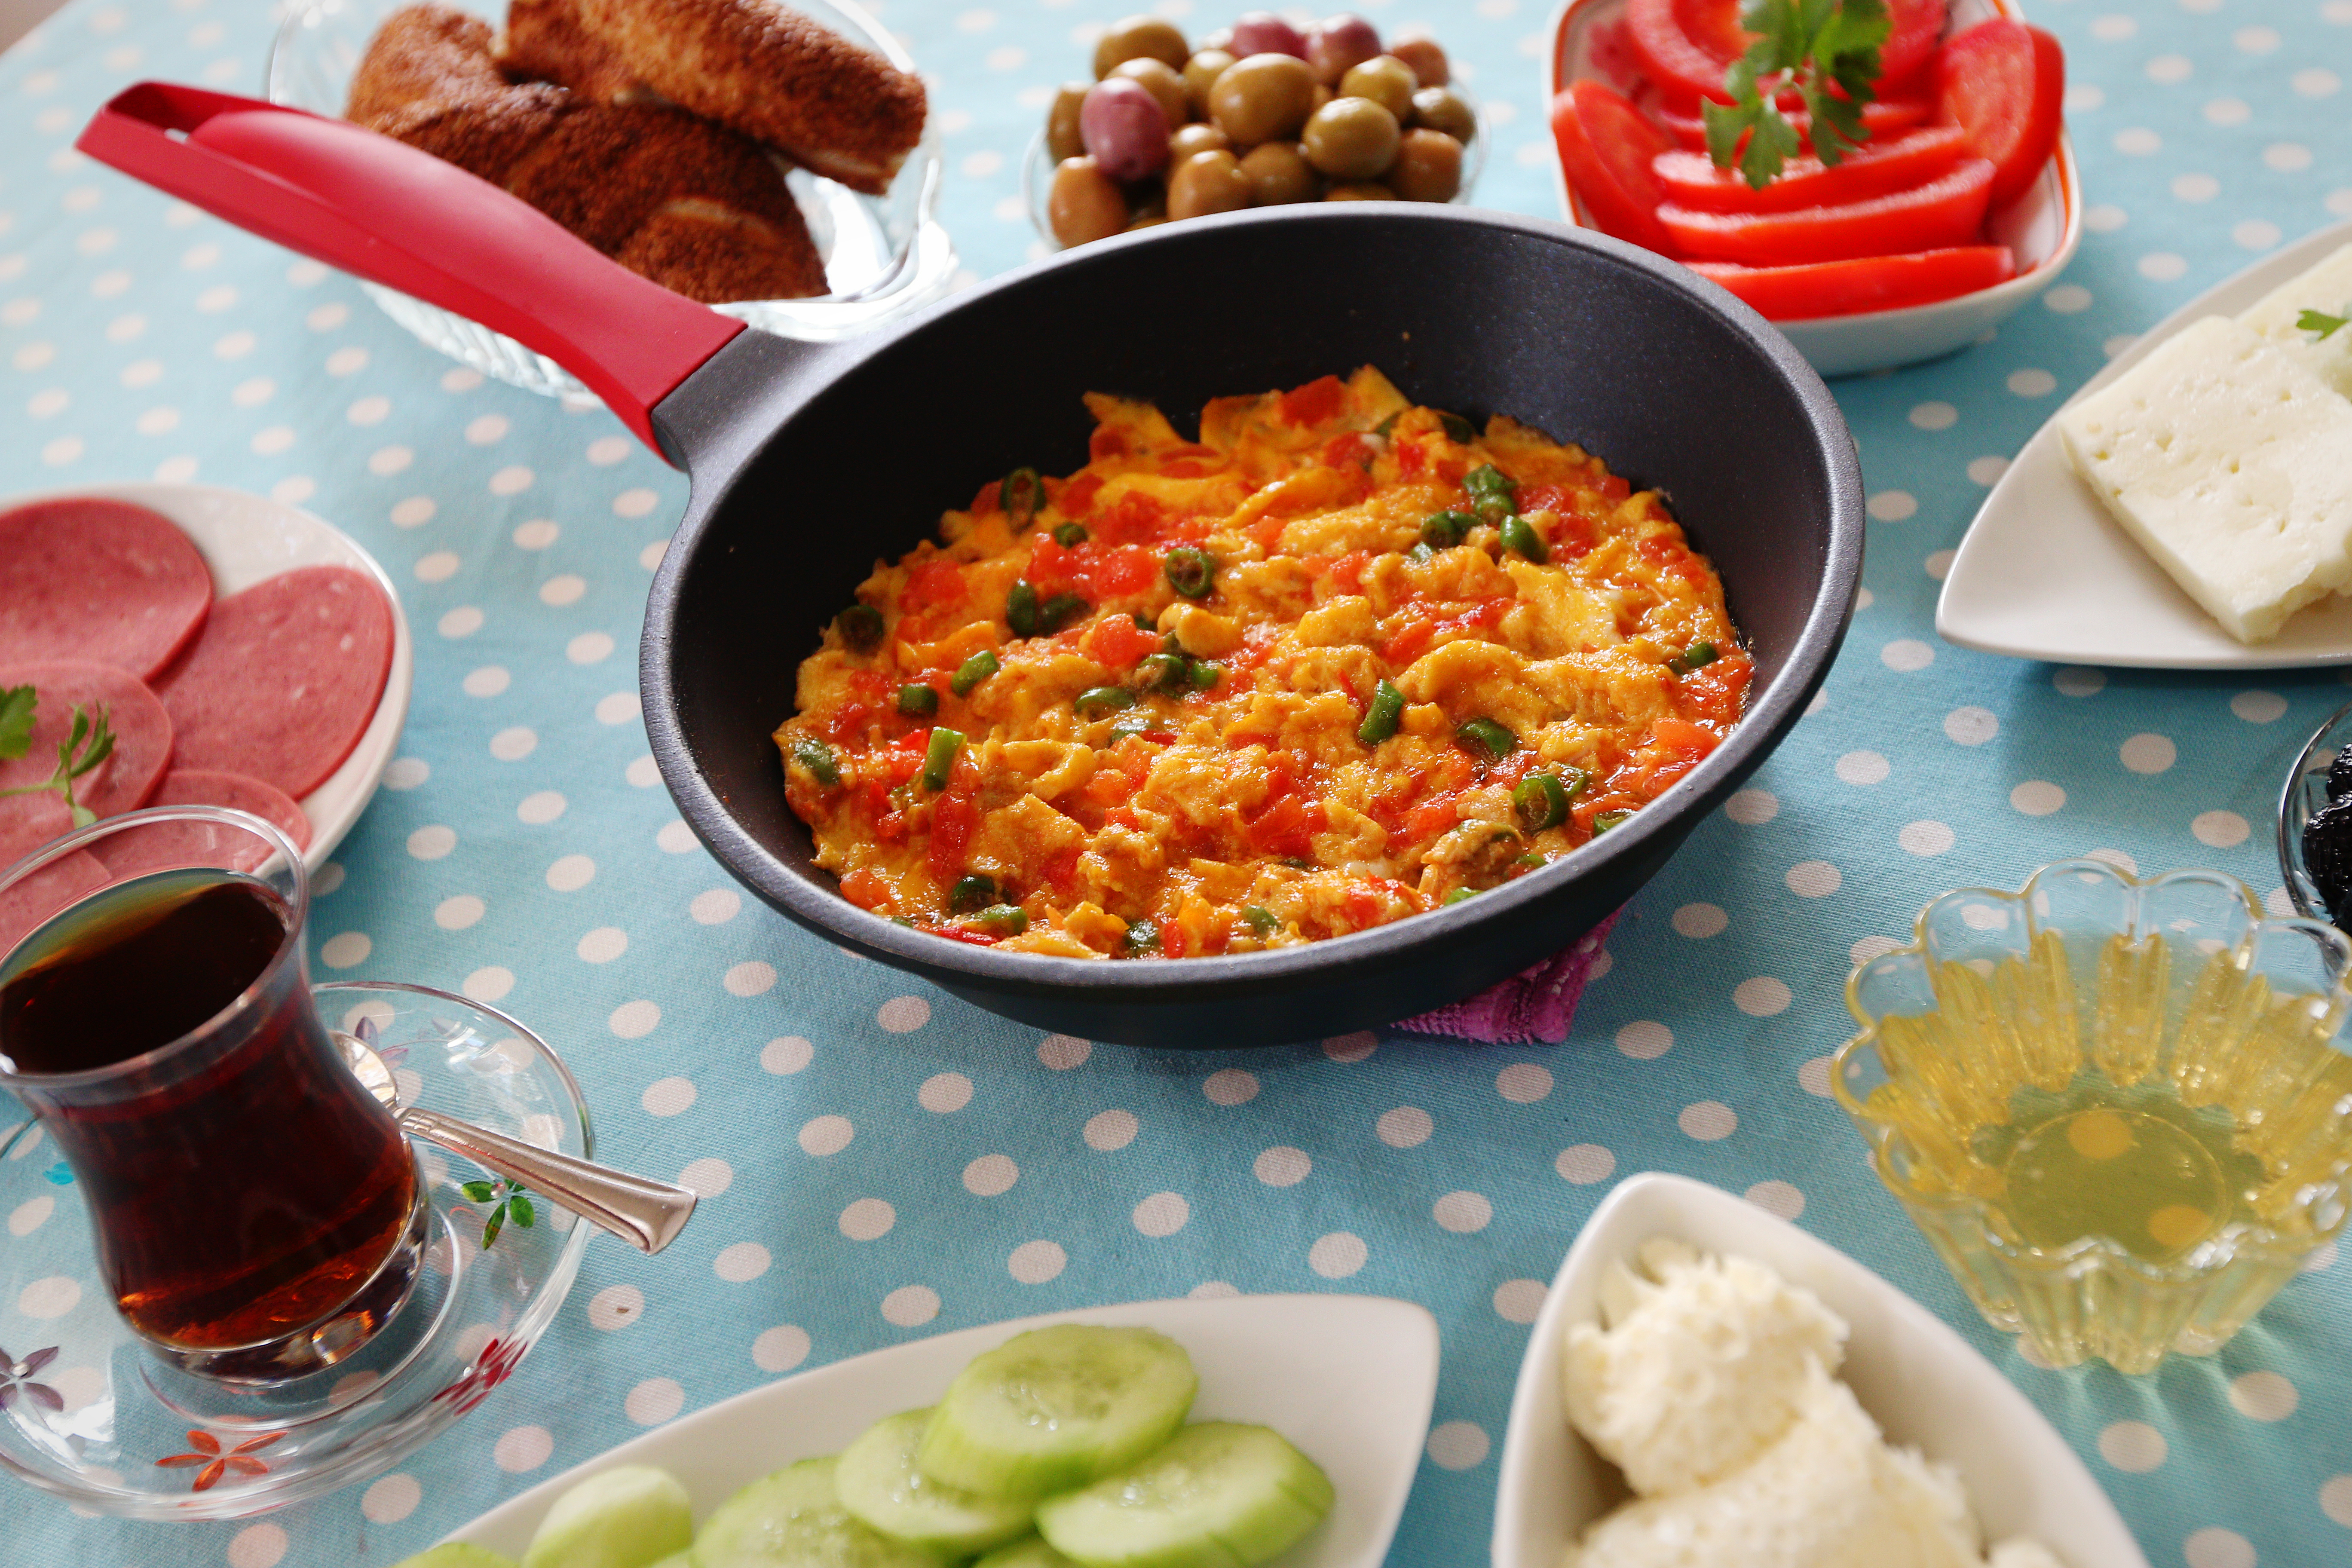 Flavor-wise, on its own, Menemen is like a Shakshouka or a French Piperade or an Indian Bhurji or some can even argue that it's similar to Huevos Rancheros, but Menemen is the engine of brunch in Turkey.